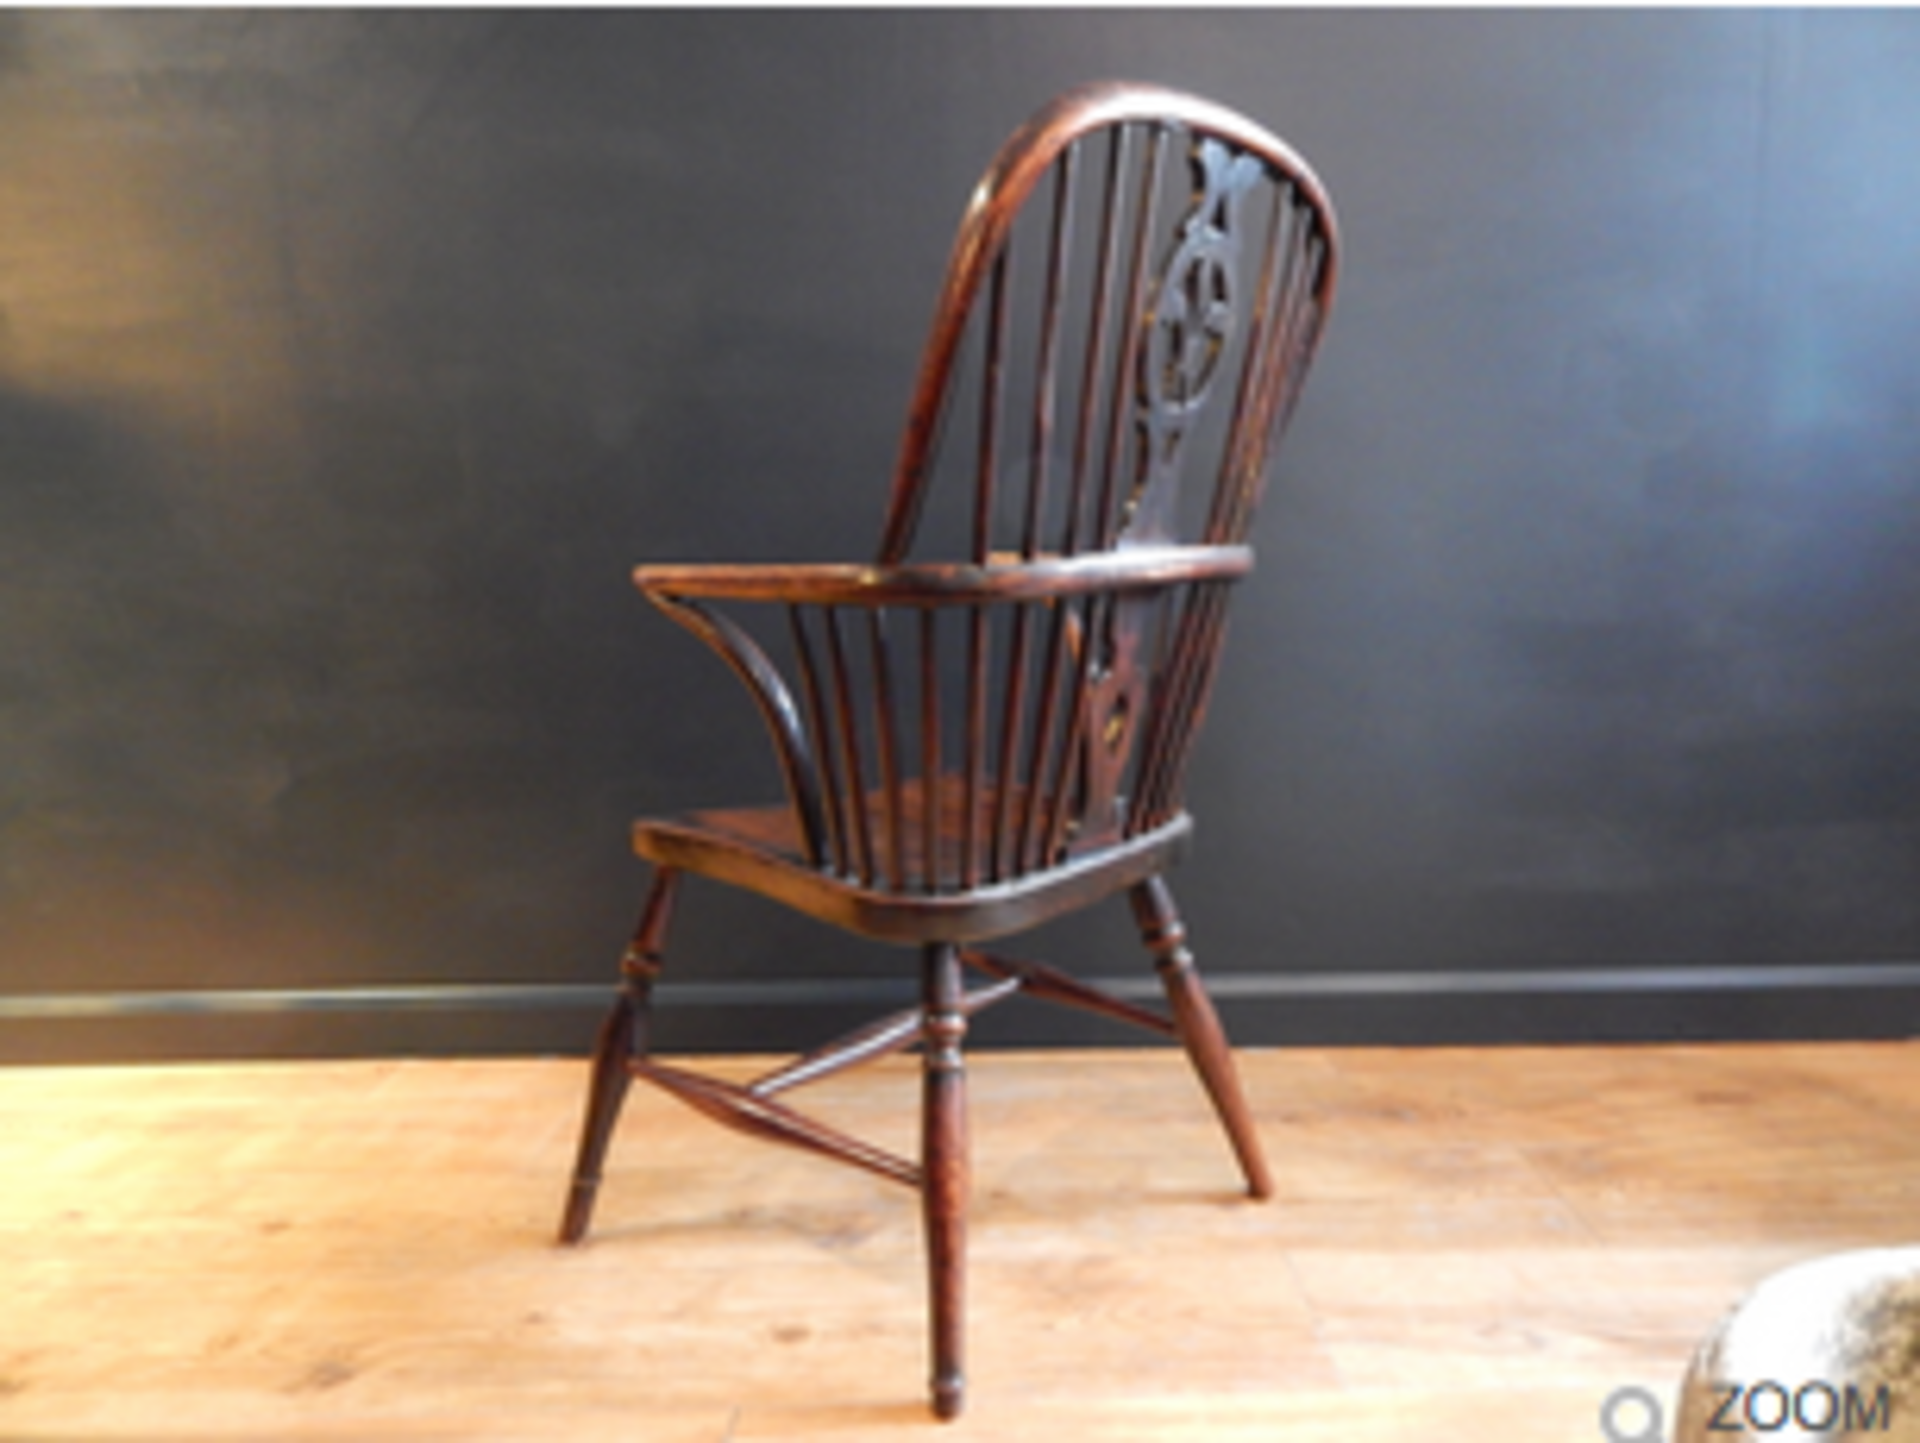 Early 19th Century Windsor Chair – Fruitwood with Prince of Wales Feathers splat - Image 6 of 6